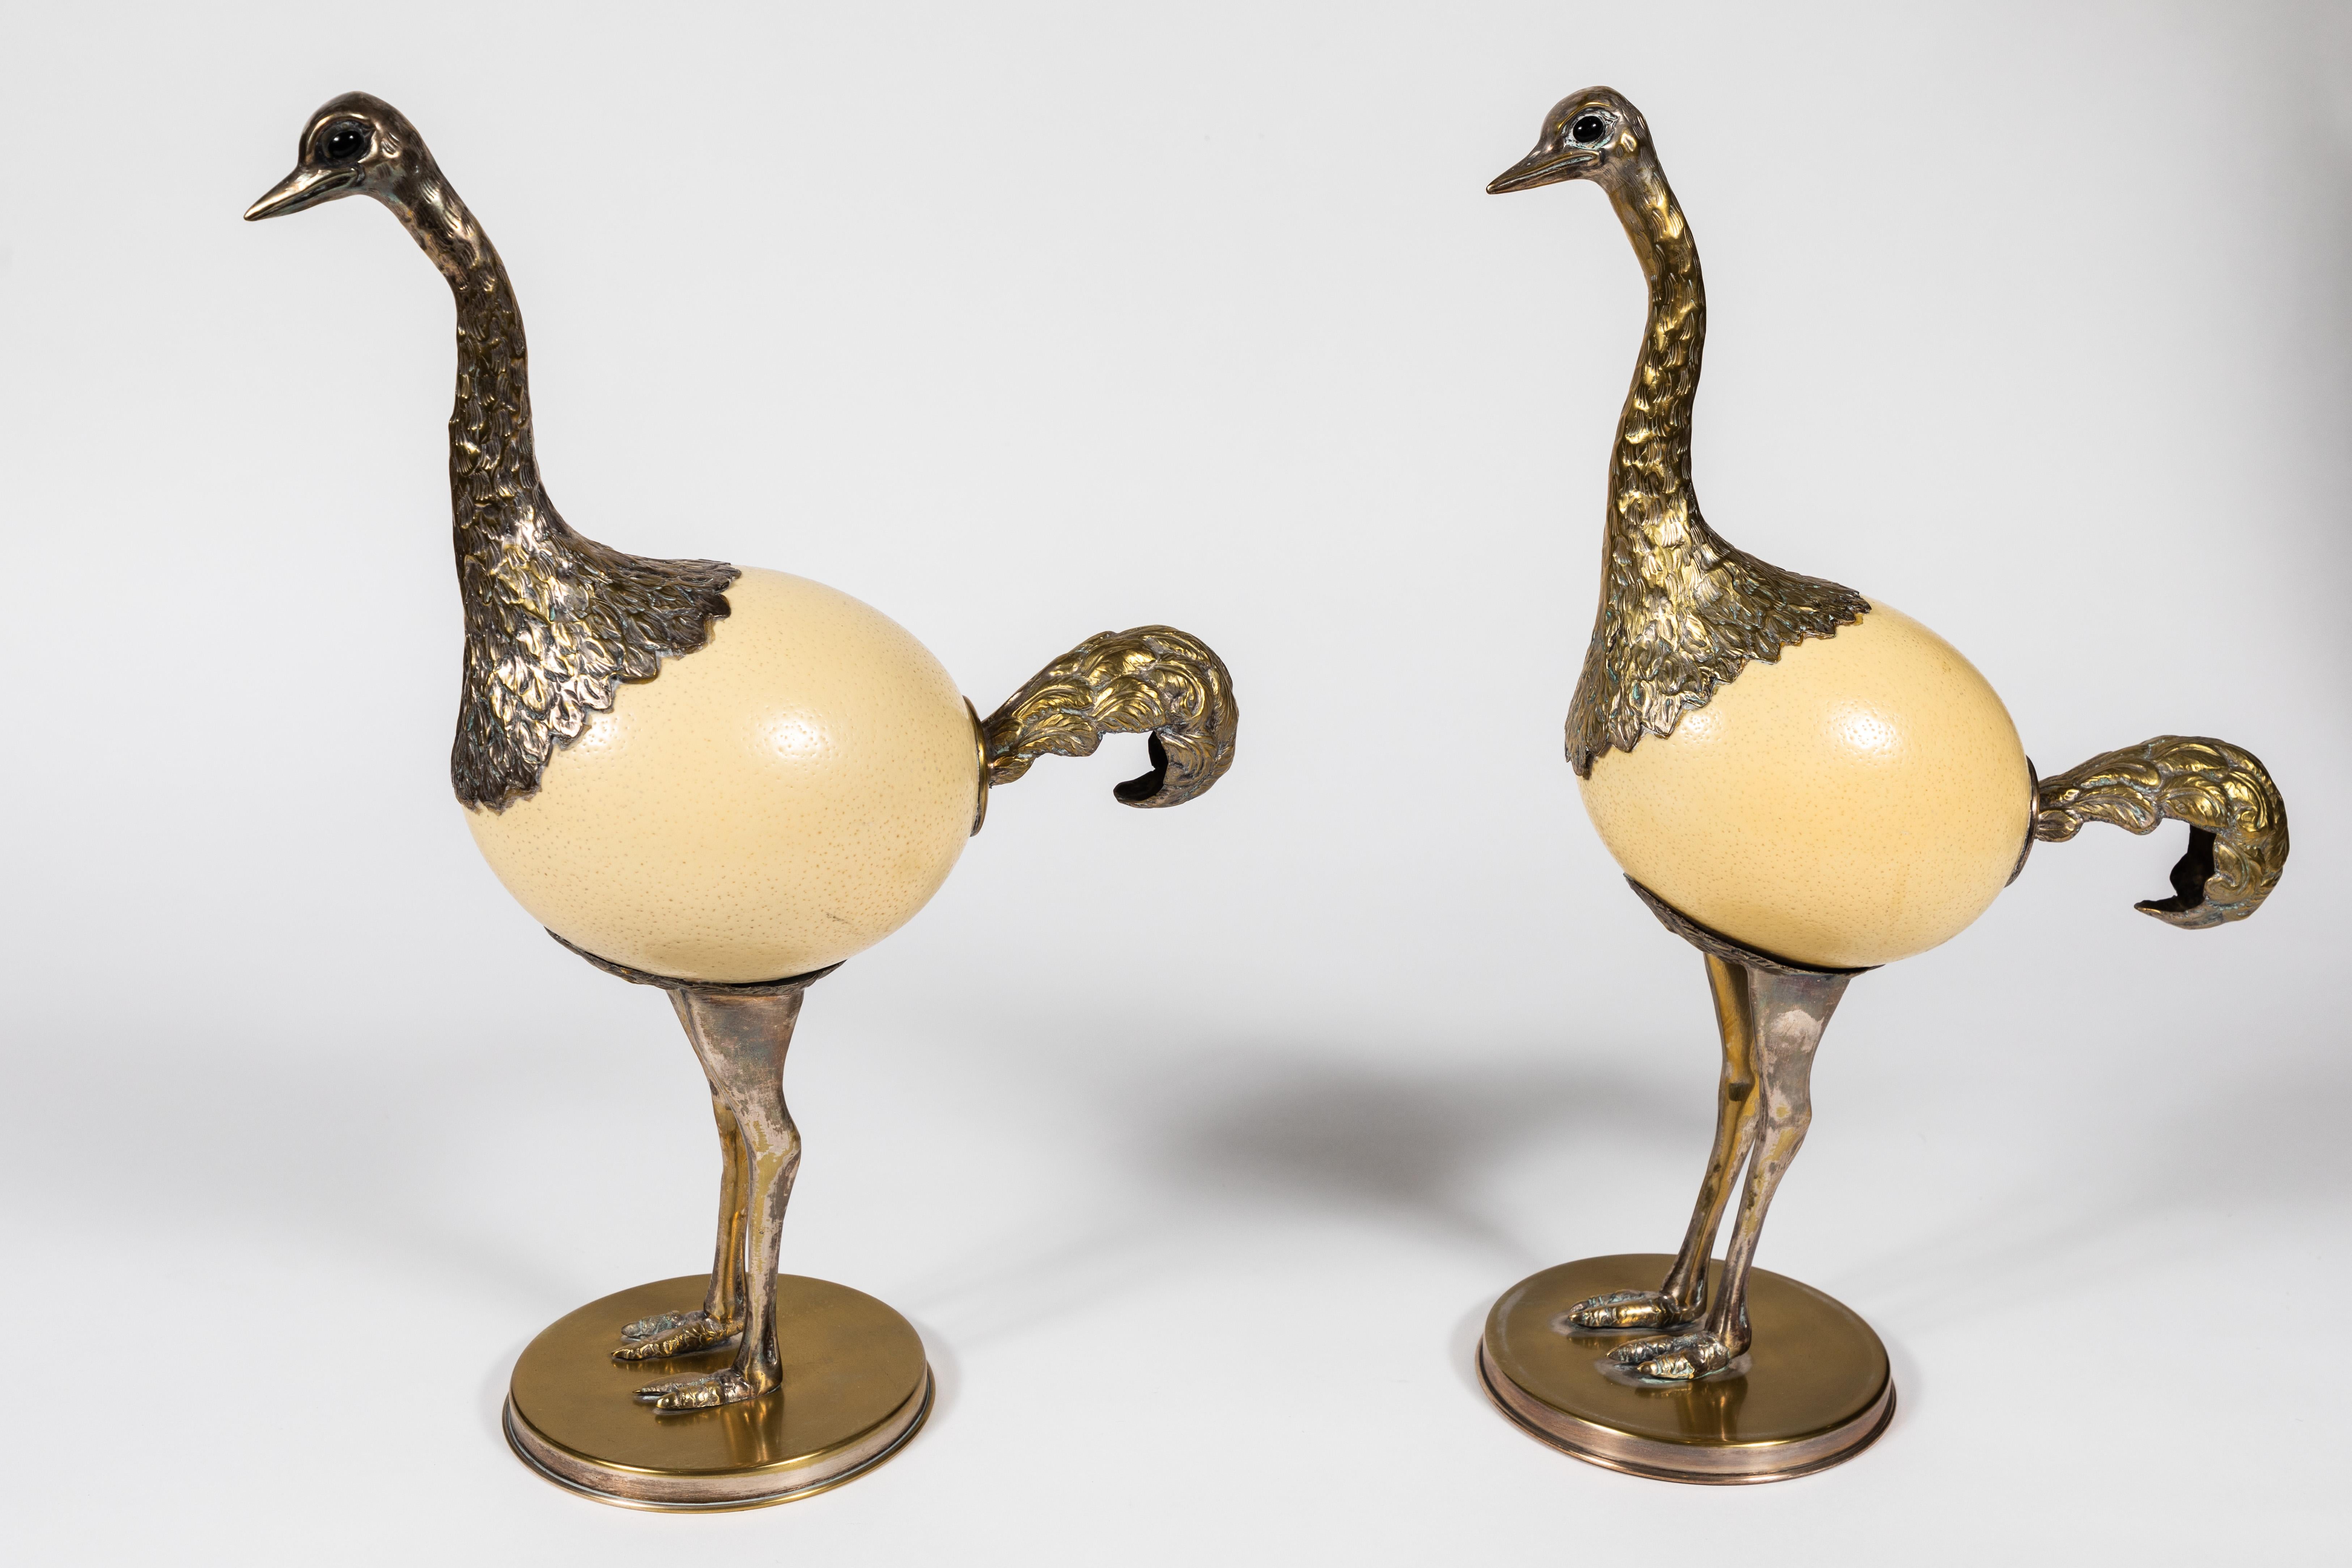 Whimsical pair of bird sculptures of ostrich eggs and pewter by Franco Lagini, 1970s. Made in Italy.